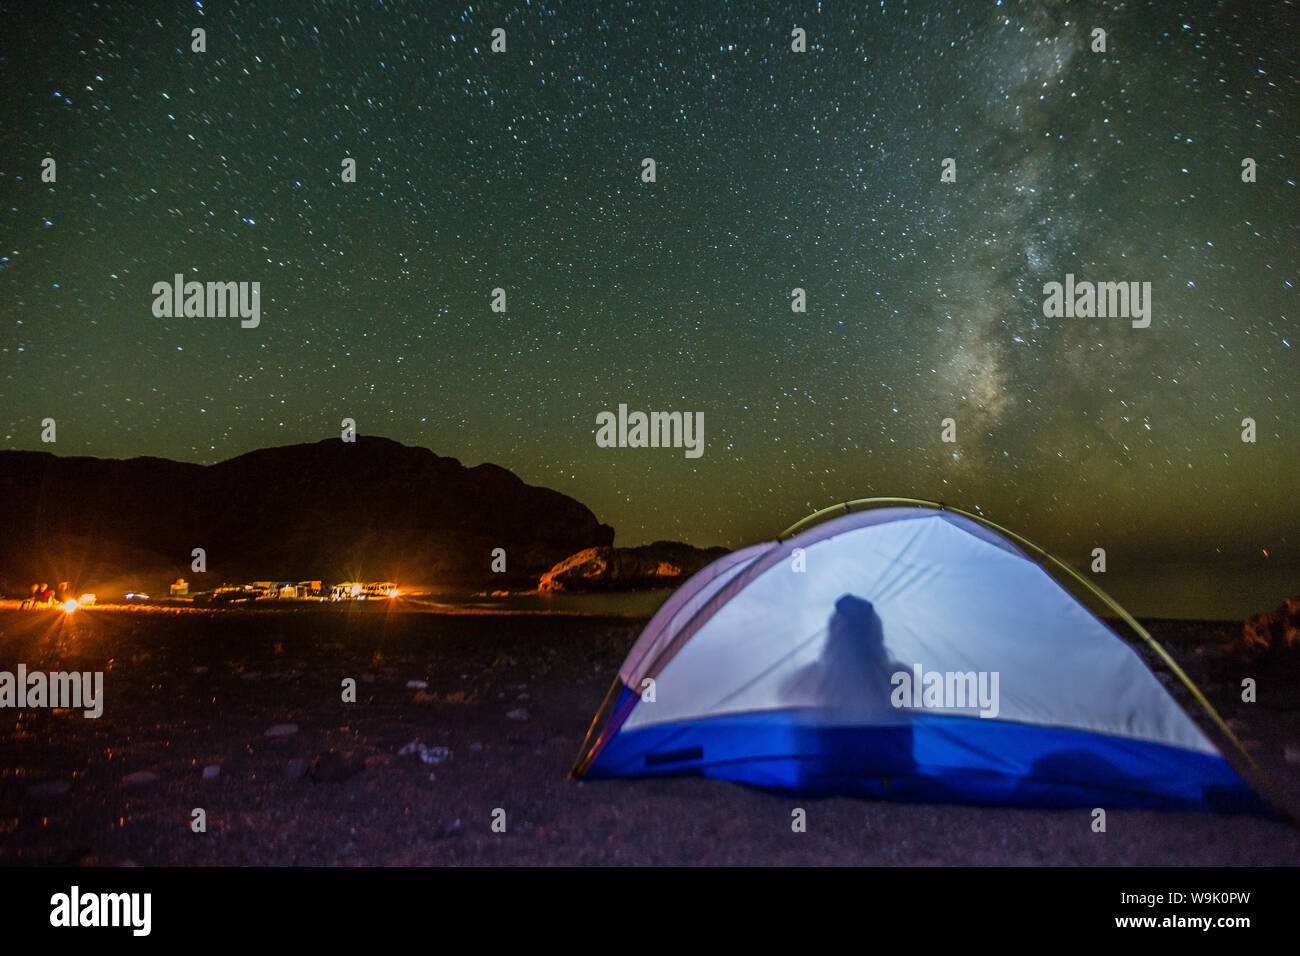 Night view of the Milky Way with lit up tent in foreground, Himalaya Beach, Sonora, Mexico, North America Stock Photo